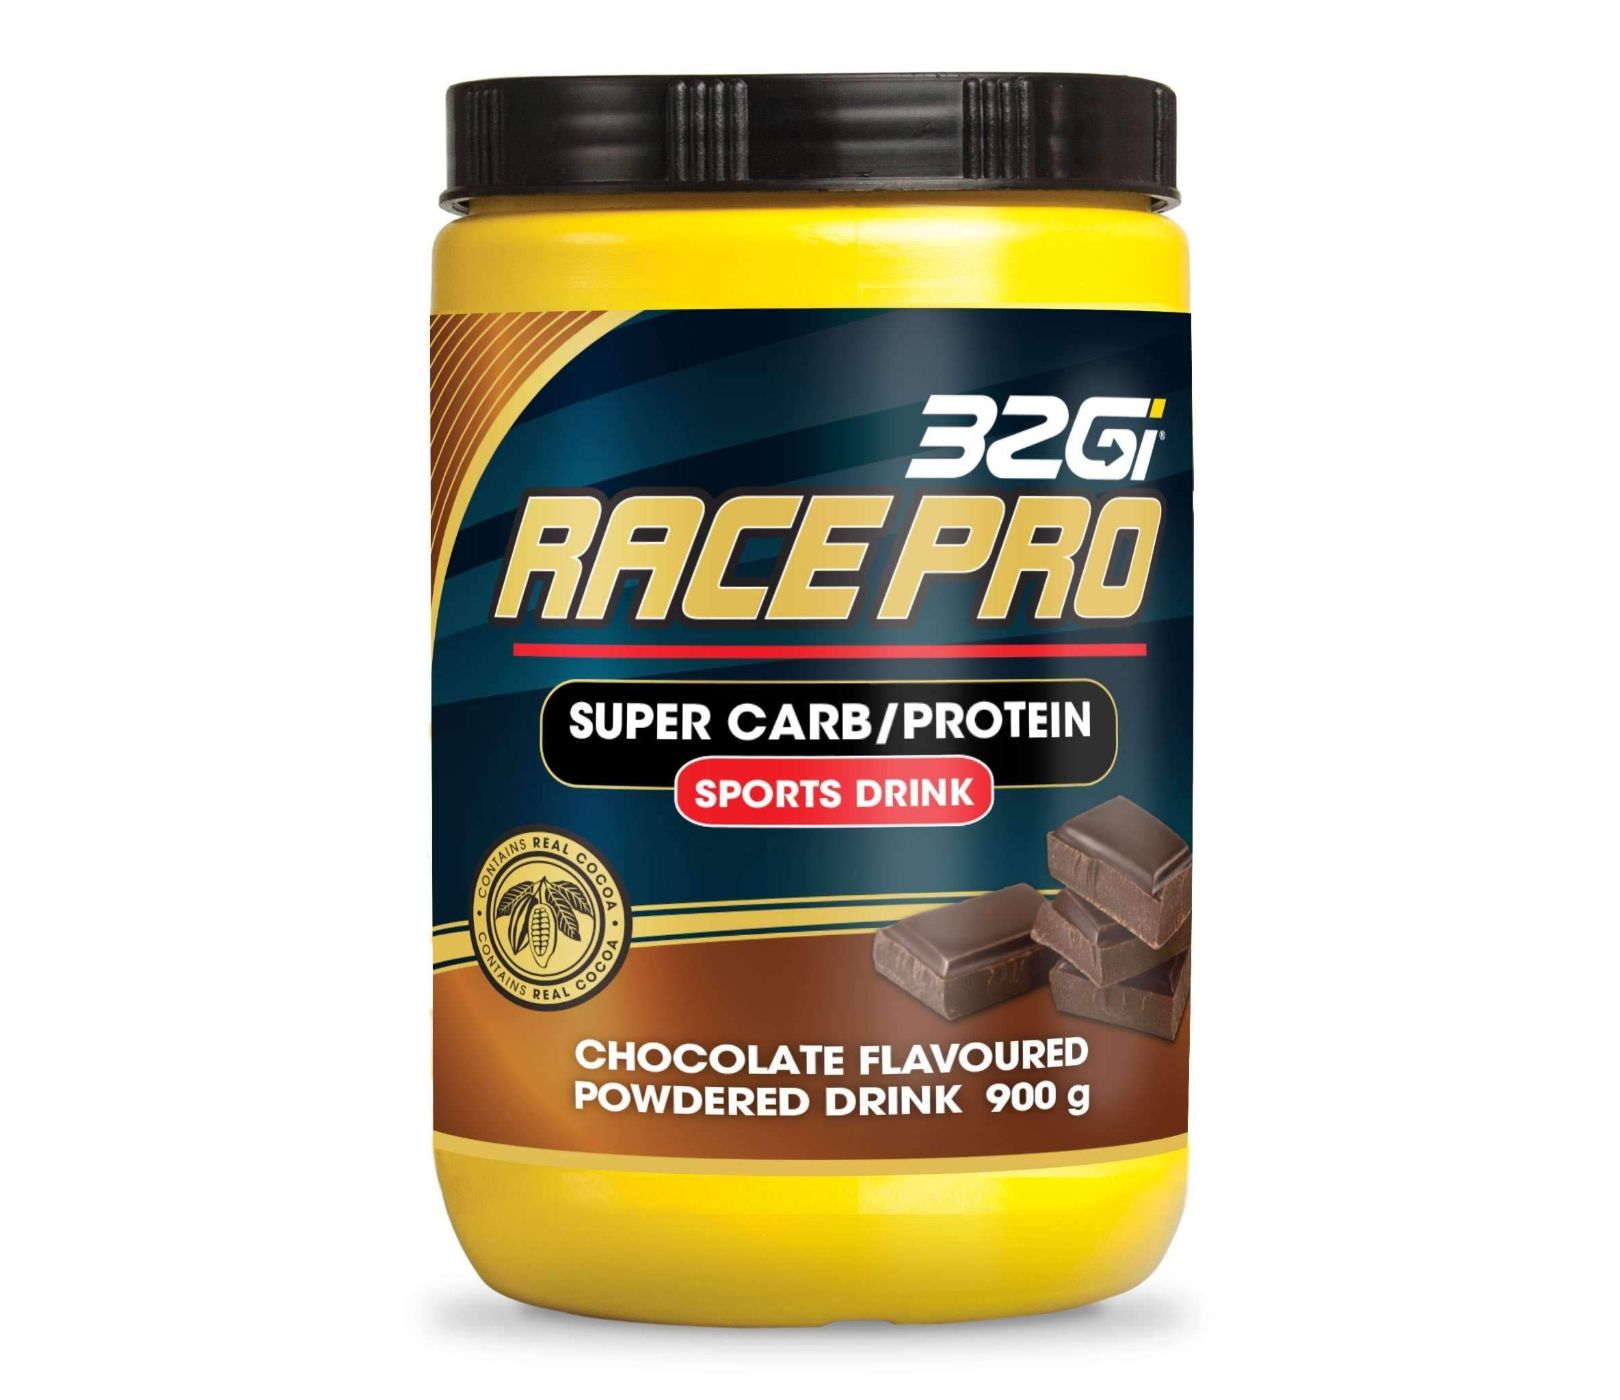 32GI Race Pro Super Carb/Protein Chocolate Sports Drink Tub - 900g